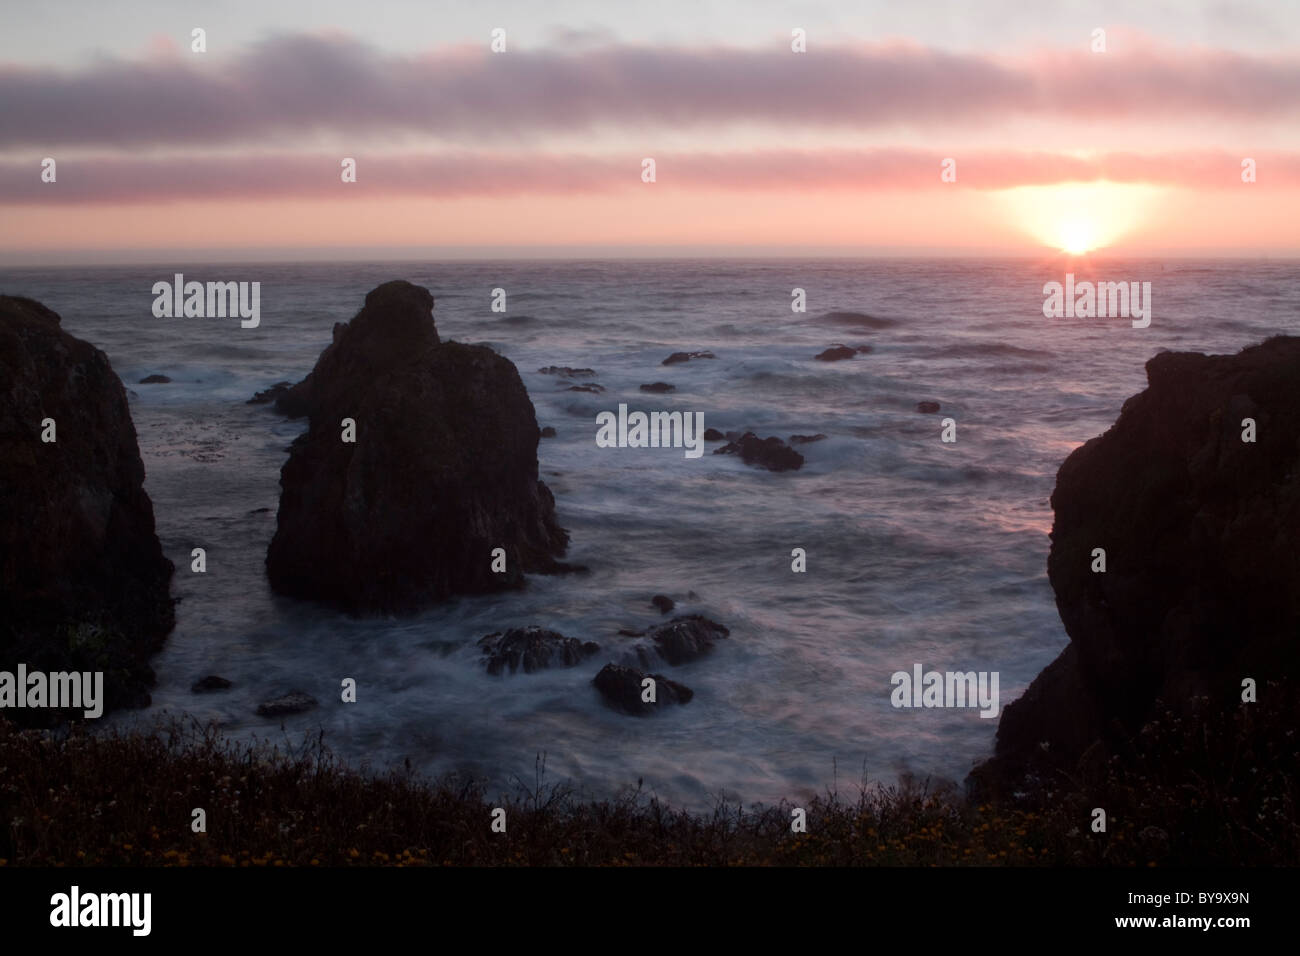 Sunset over the Pacific Ocean on the rocky Mendocino coast near Fort Bragg, CA Stock Photo